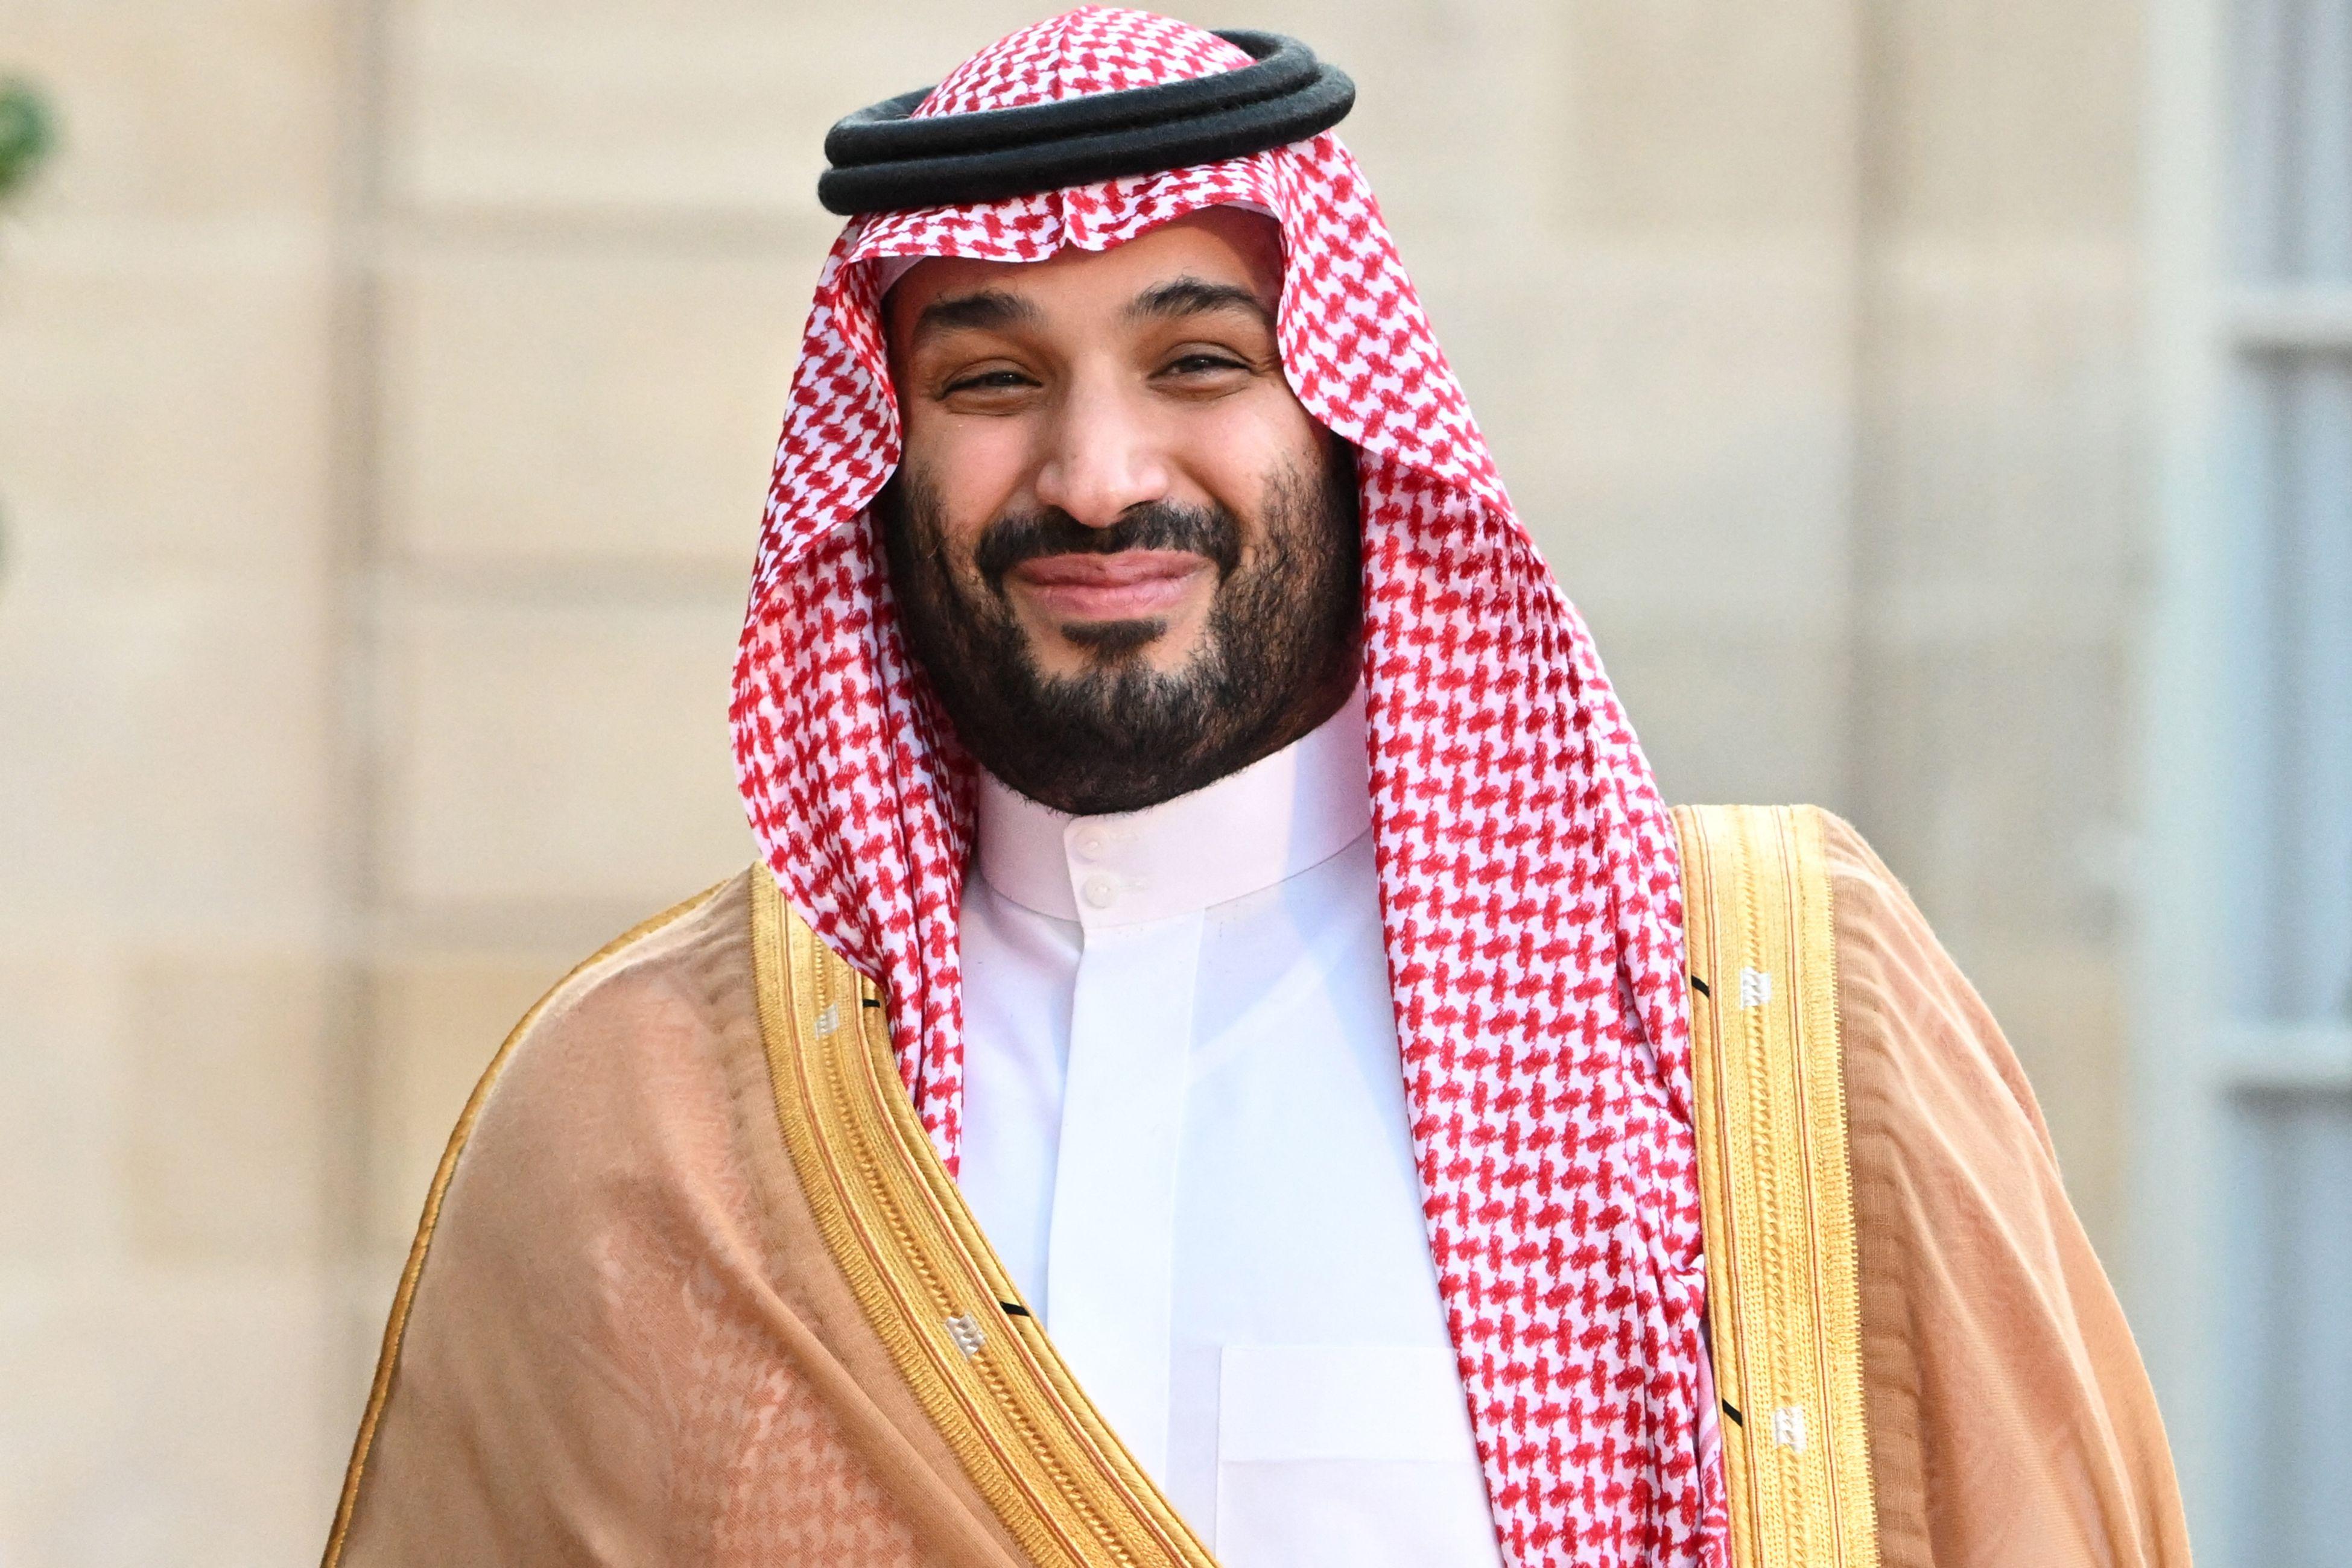 MBS's ascension to prime minister protects him from consequences for Khashoggi's death.